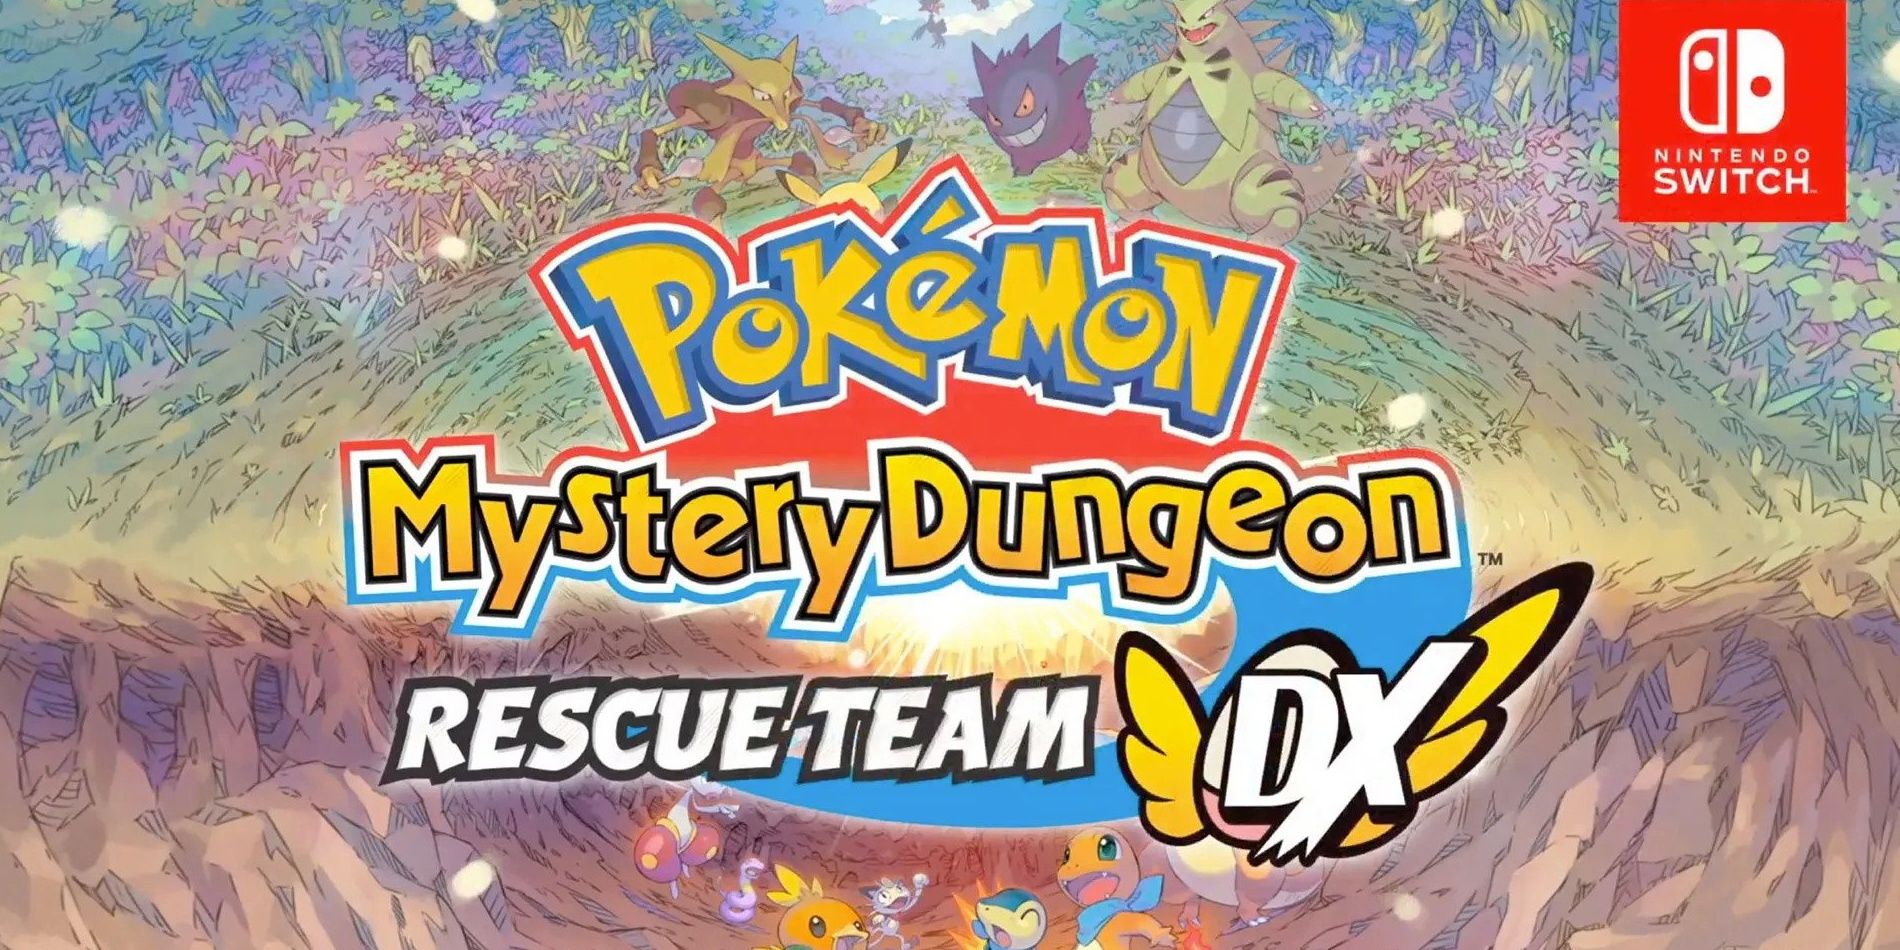 Pokemon Mystery Dungeon Rescue Team DX cover art.